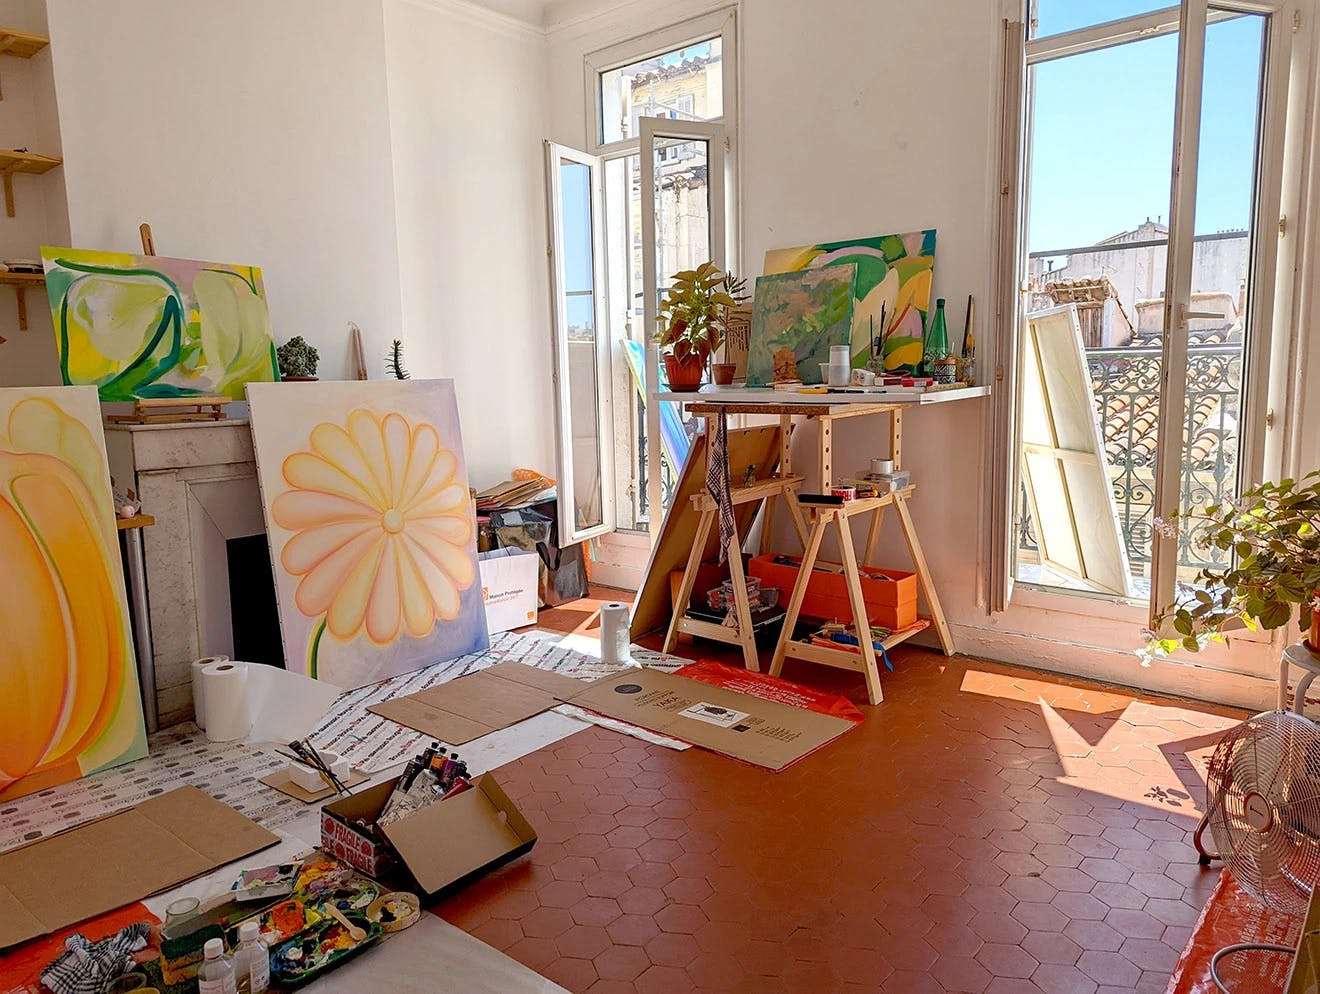 Roche's sun-filled studio, featuring works in progress leaned against the wall.